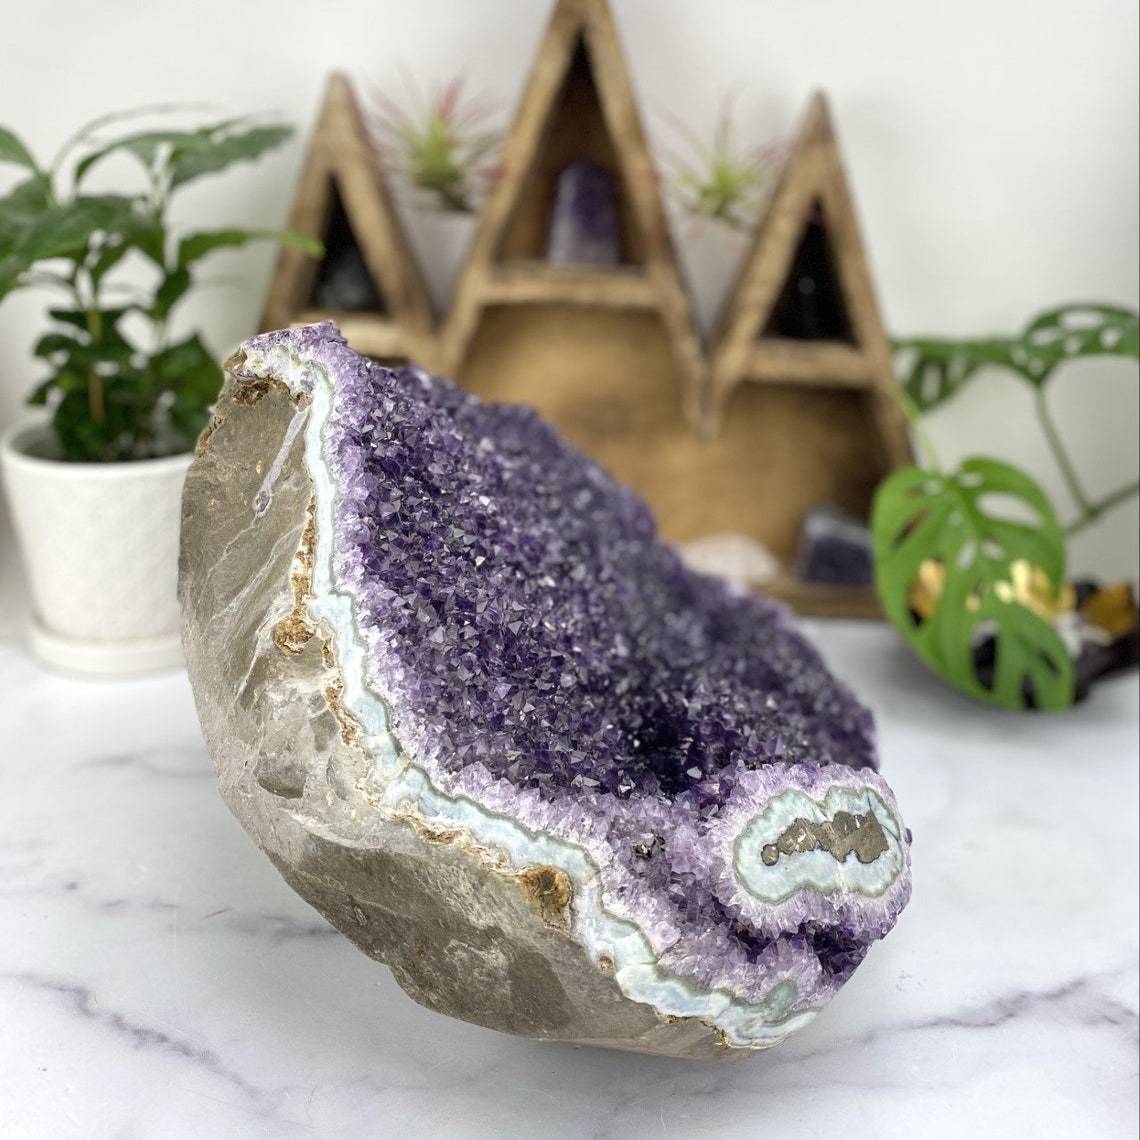 side view of Amethyst Cluster with a Stalactite with Calcite with decorations in the background